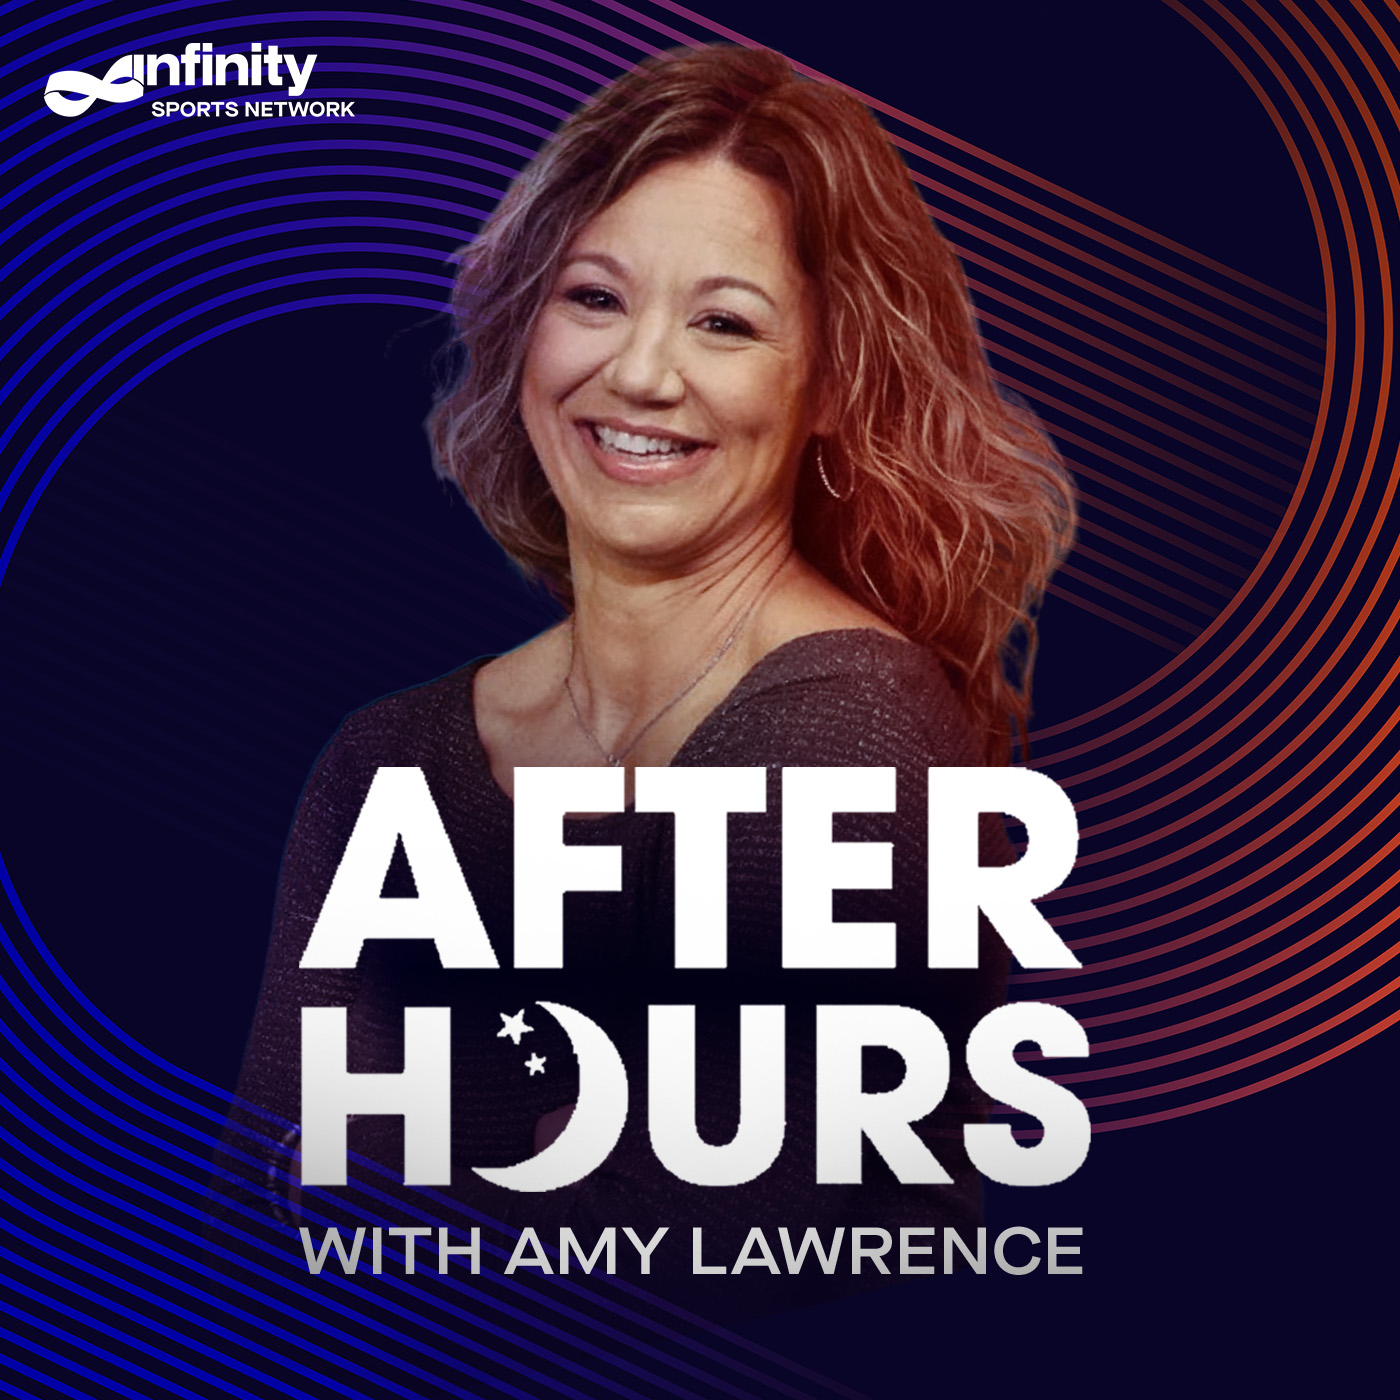 1/6/20 After Hours with Amy Lawrence PODCAST: Hour 2